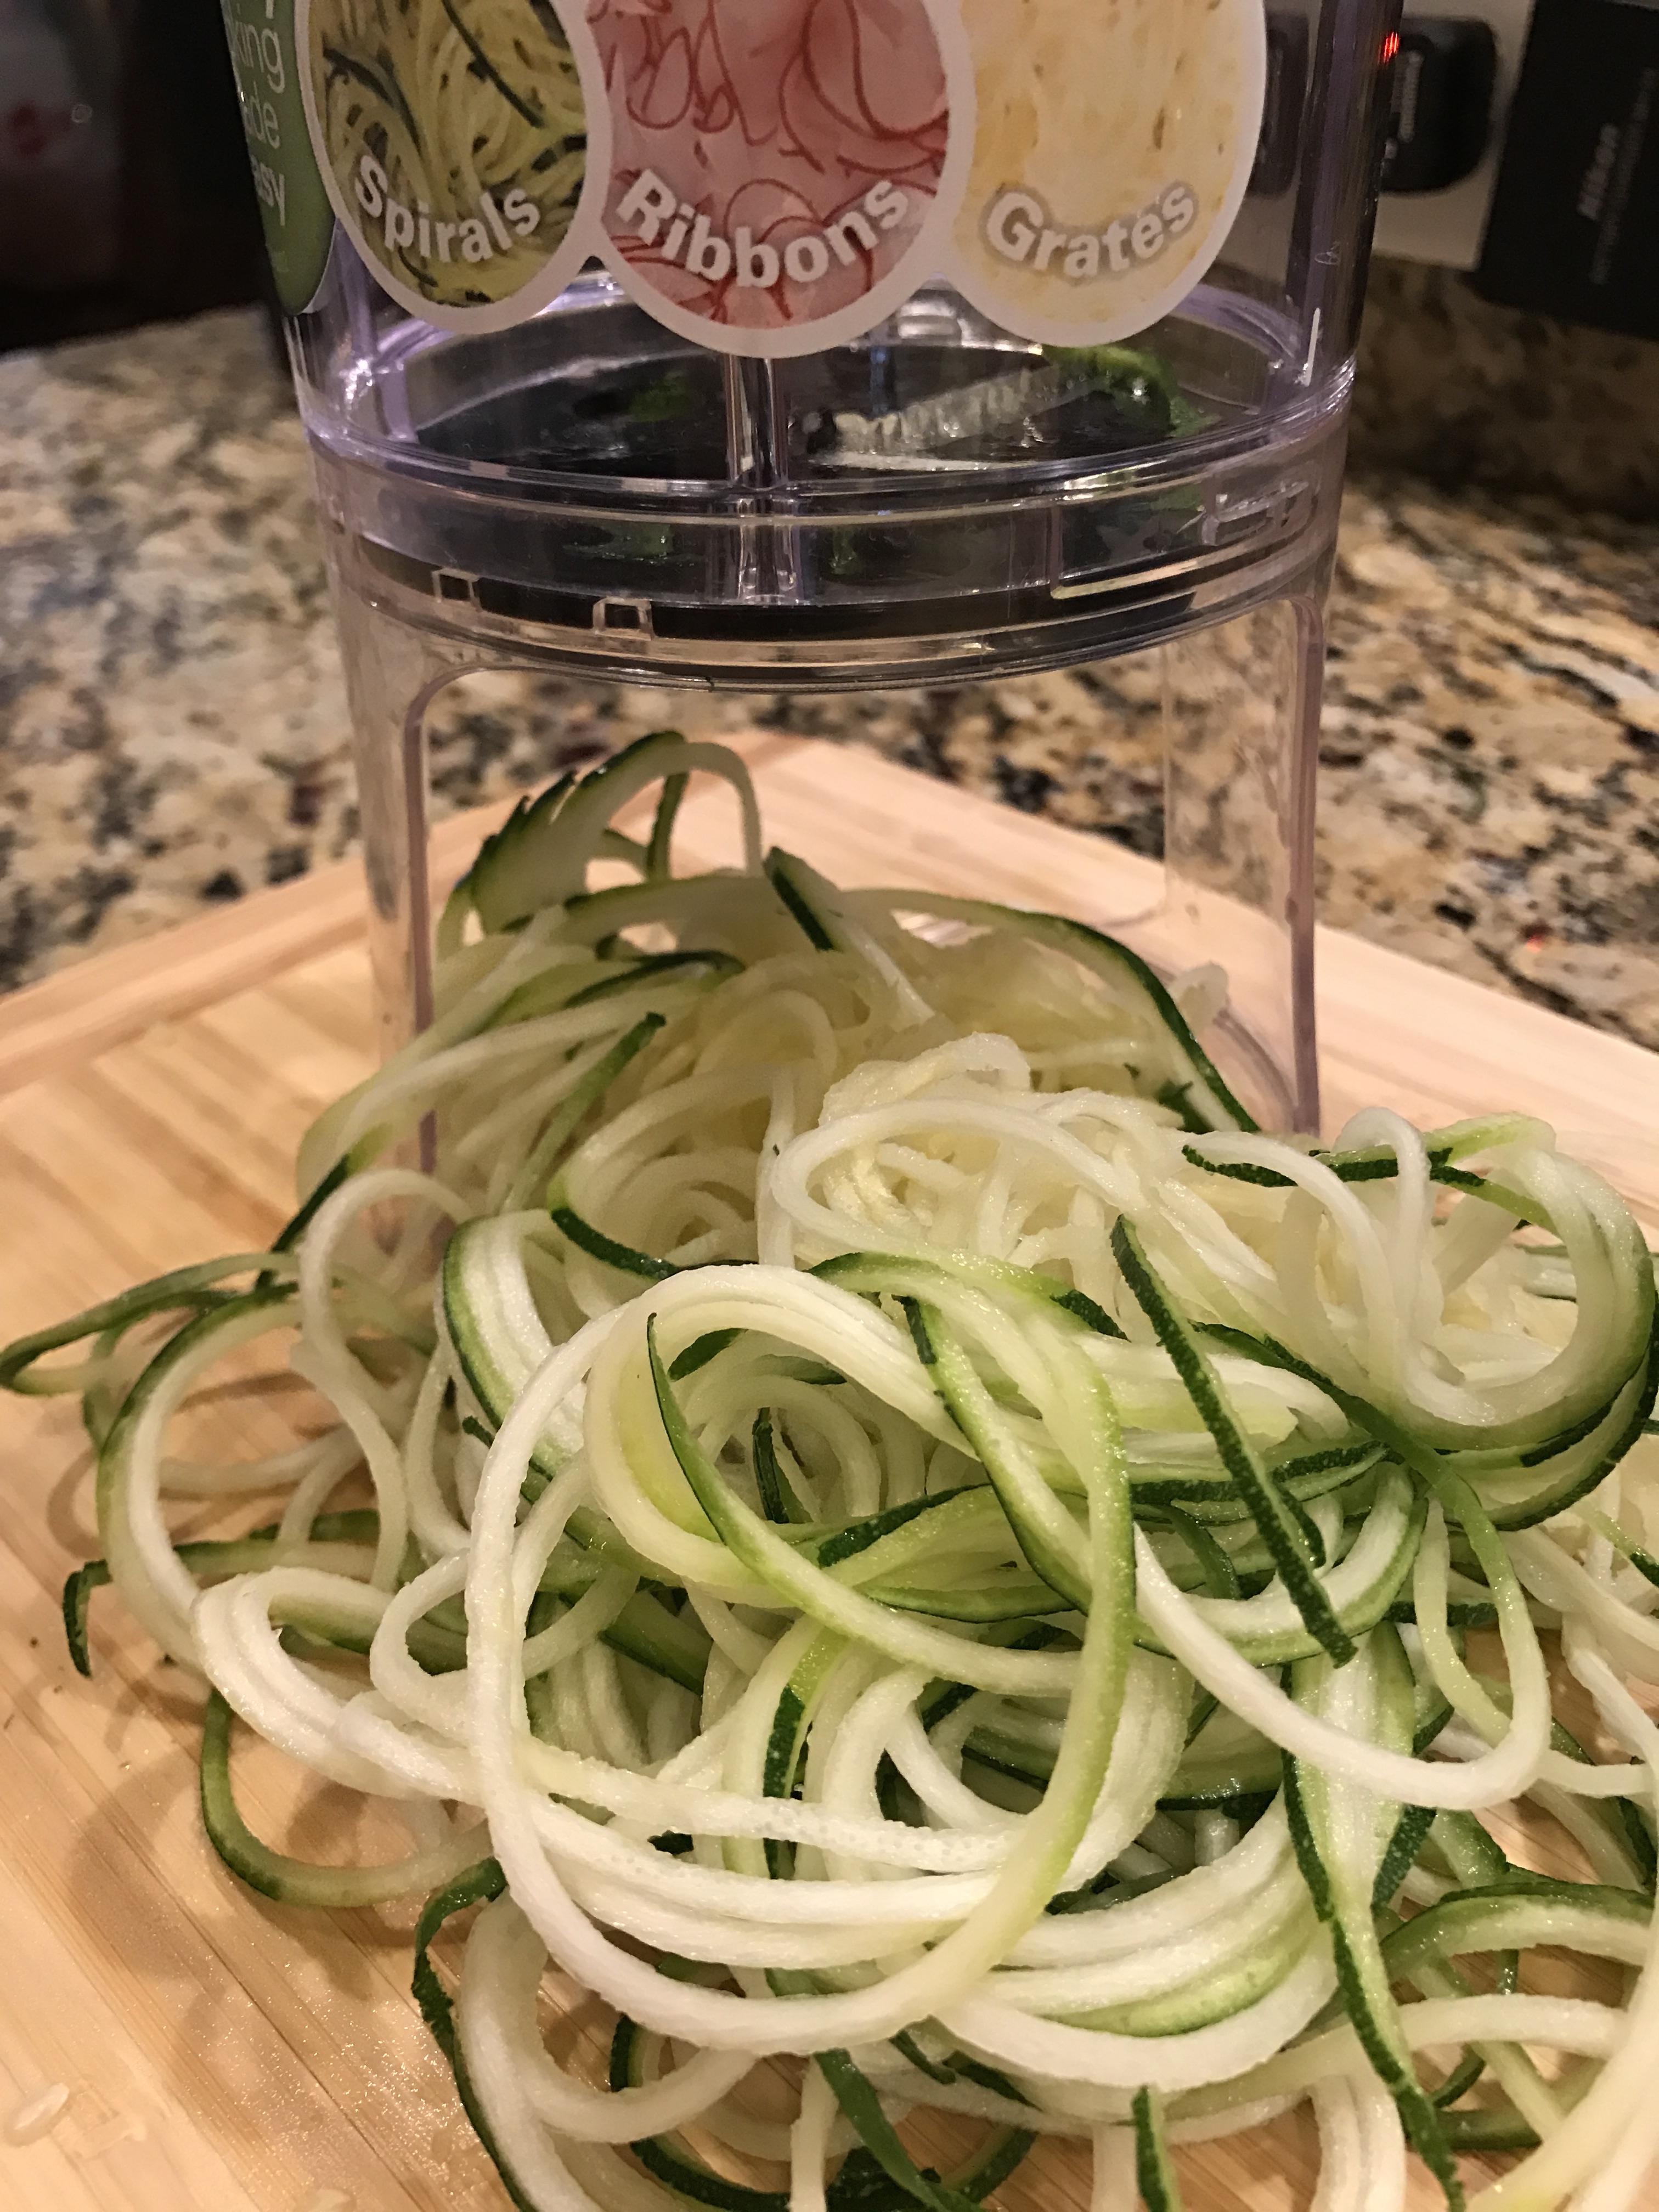 Hamilton Beach Product Review 3 in 1 Spiralizer